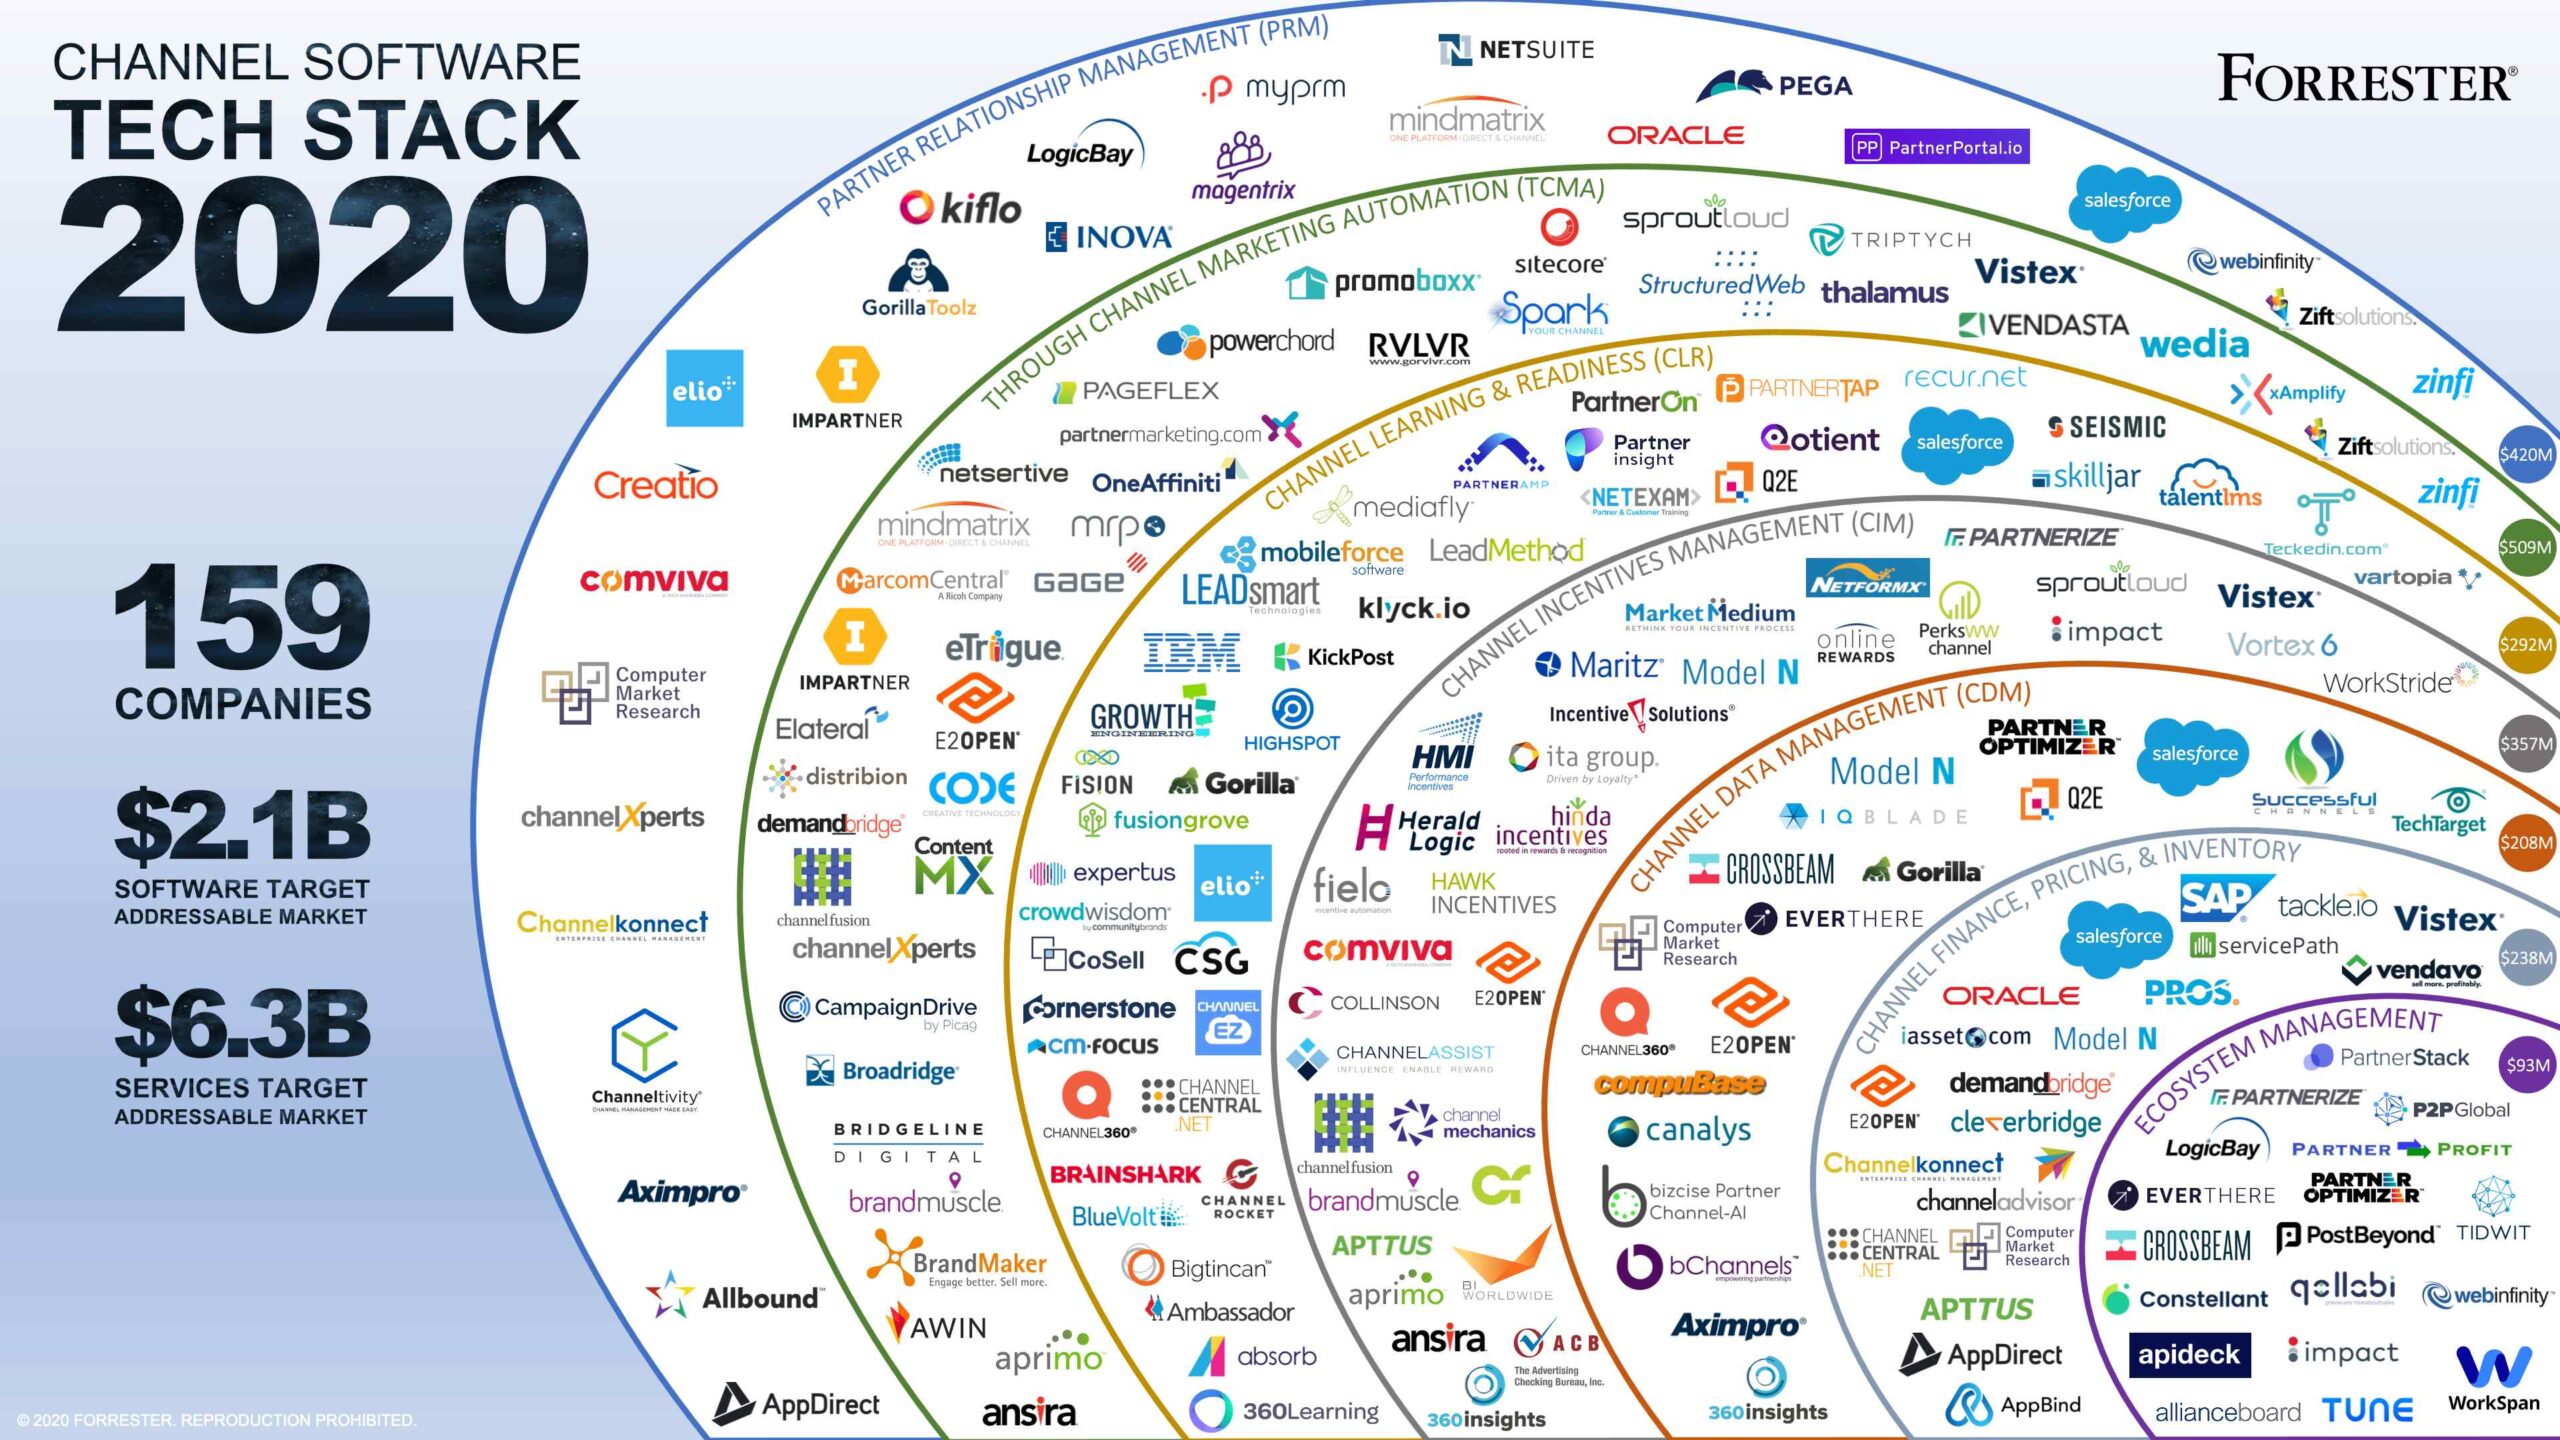 2020 channel software tech stack